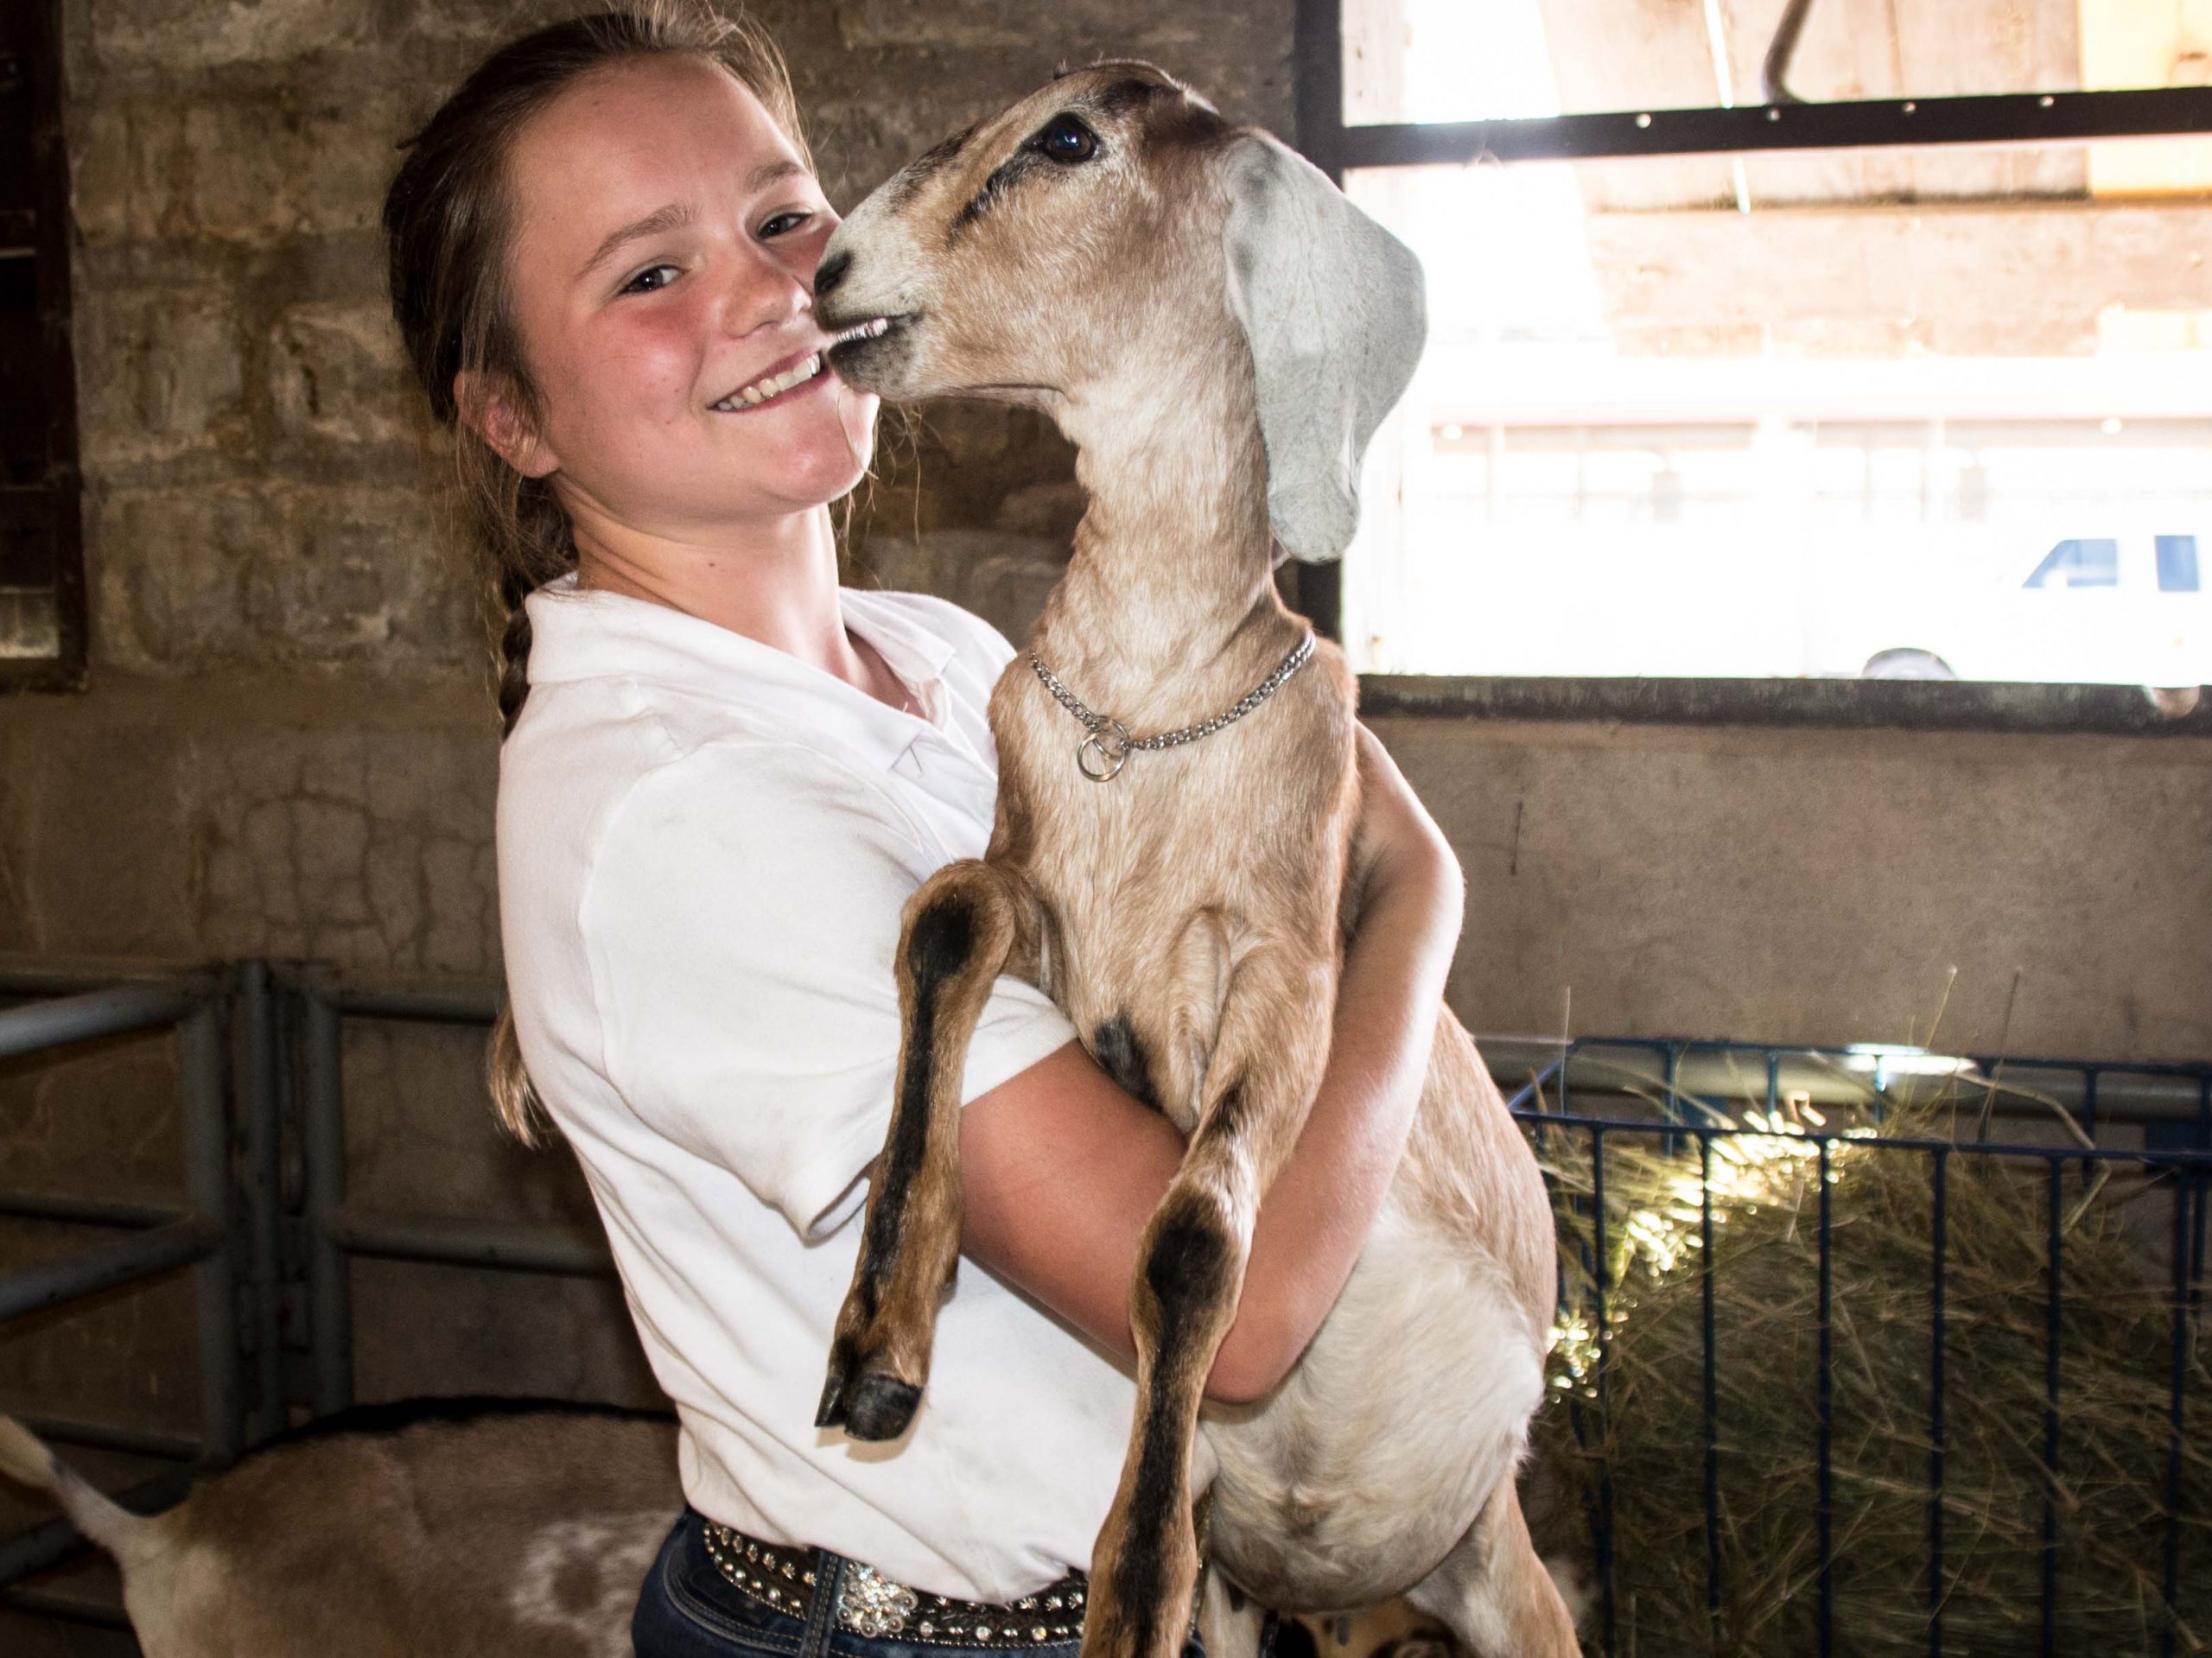 14-year-old Alice Zuber of Fairplay showed goats at the 2018 Colorado State Fair.